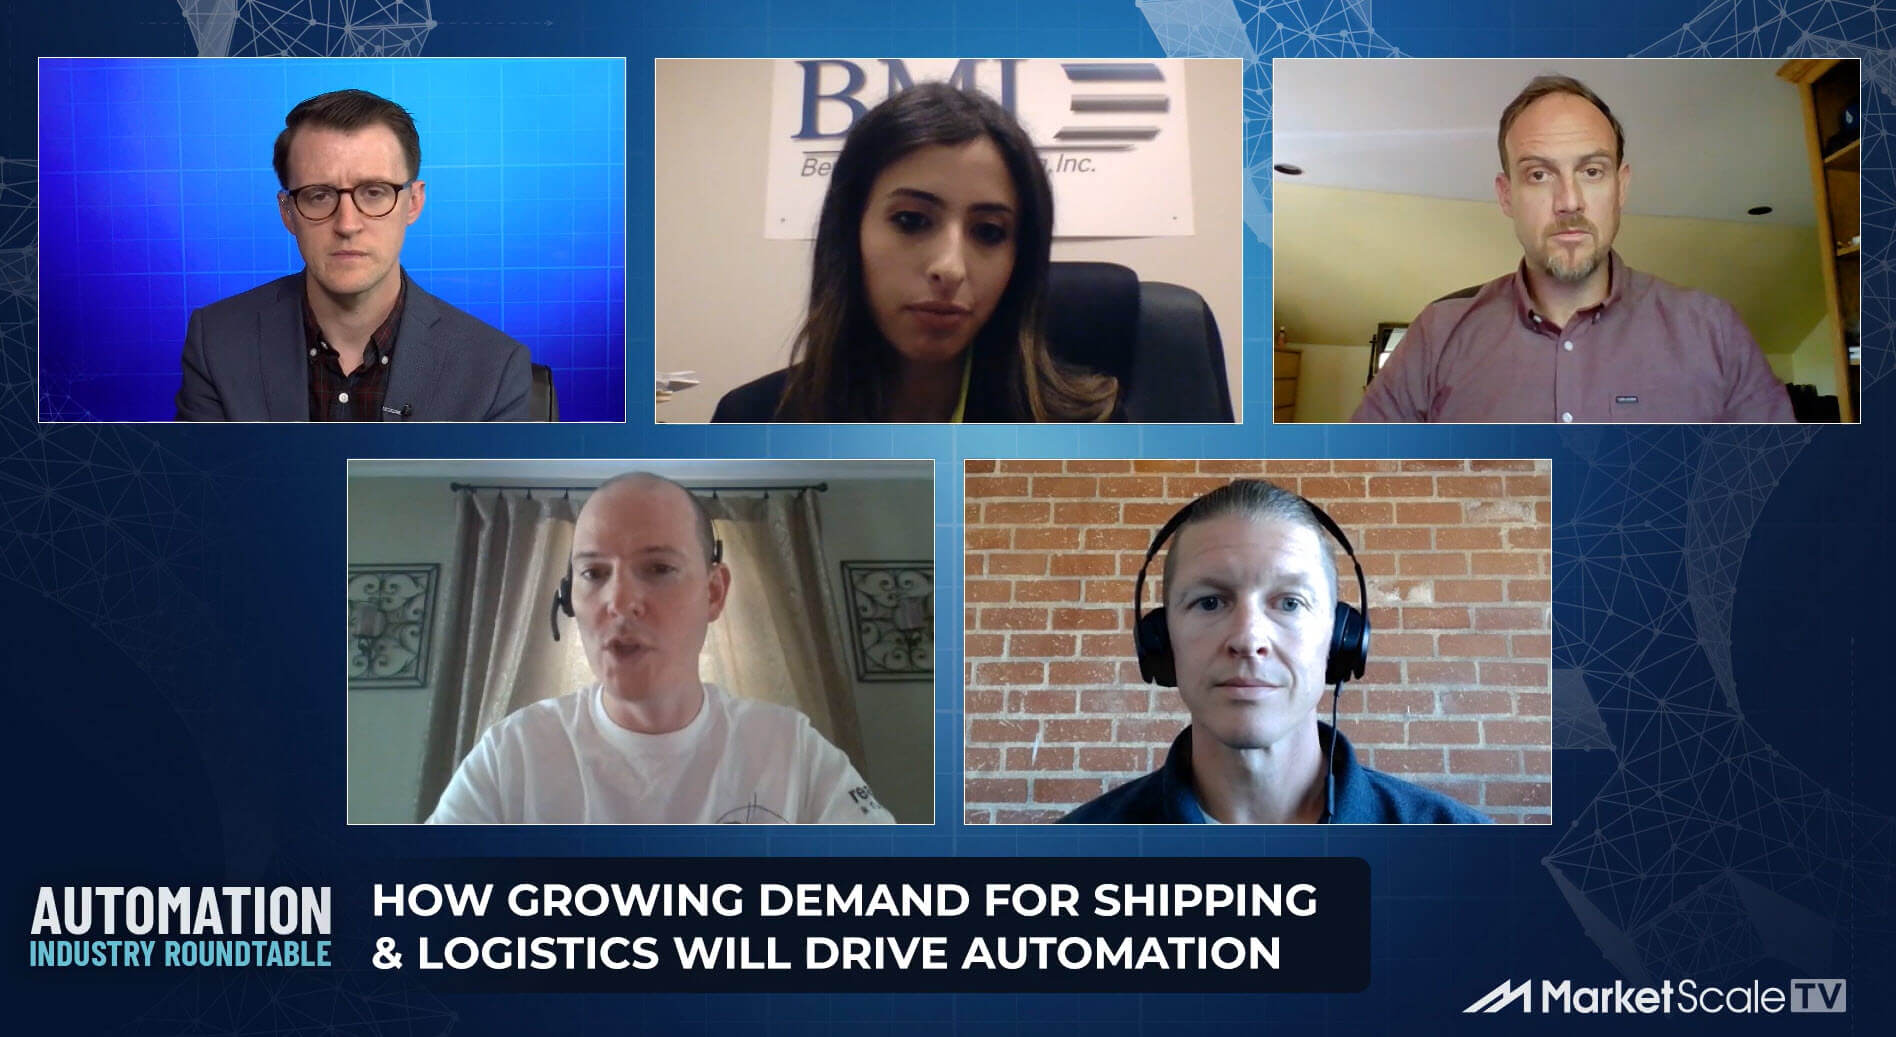 Automation Industry Roundtable: How Growing Demand for Shipping & Logistics Will Drive Automation